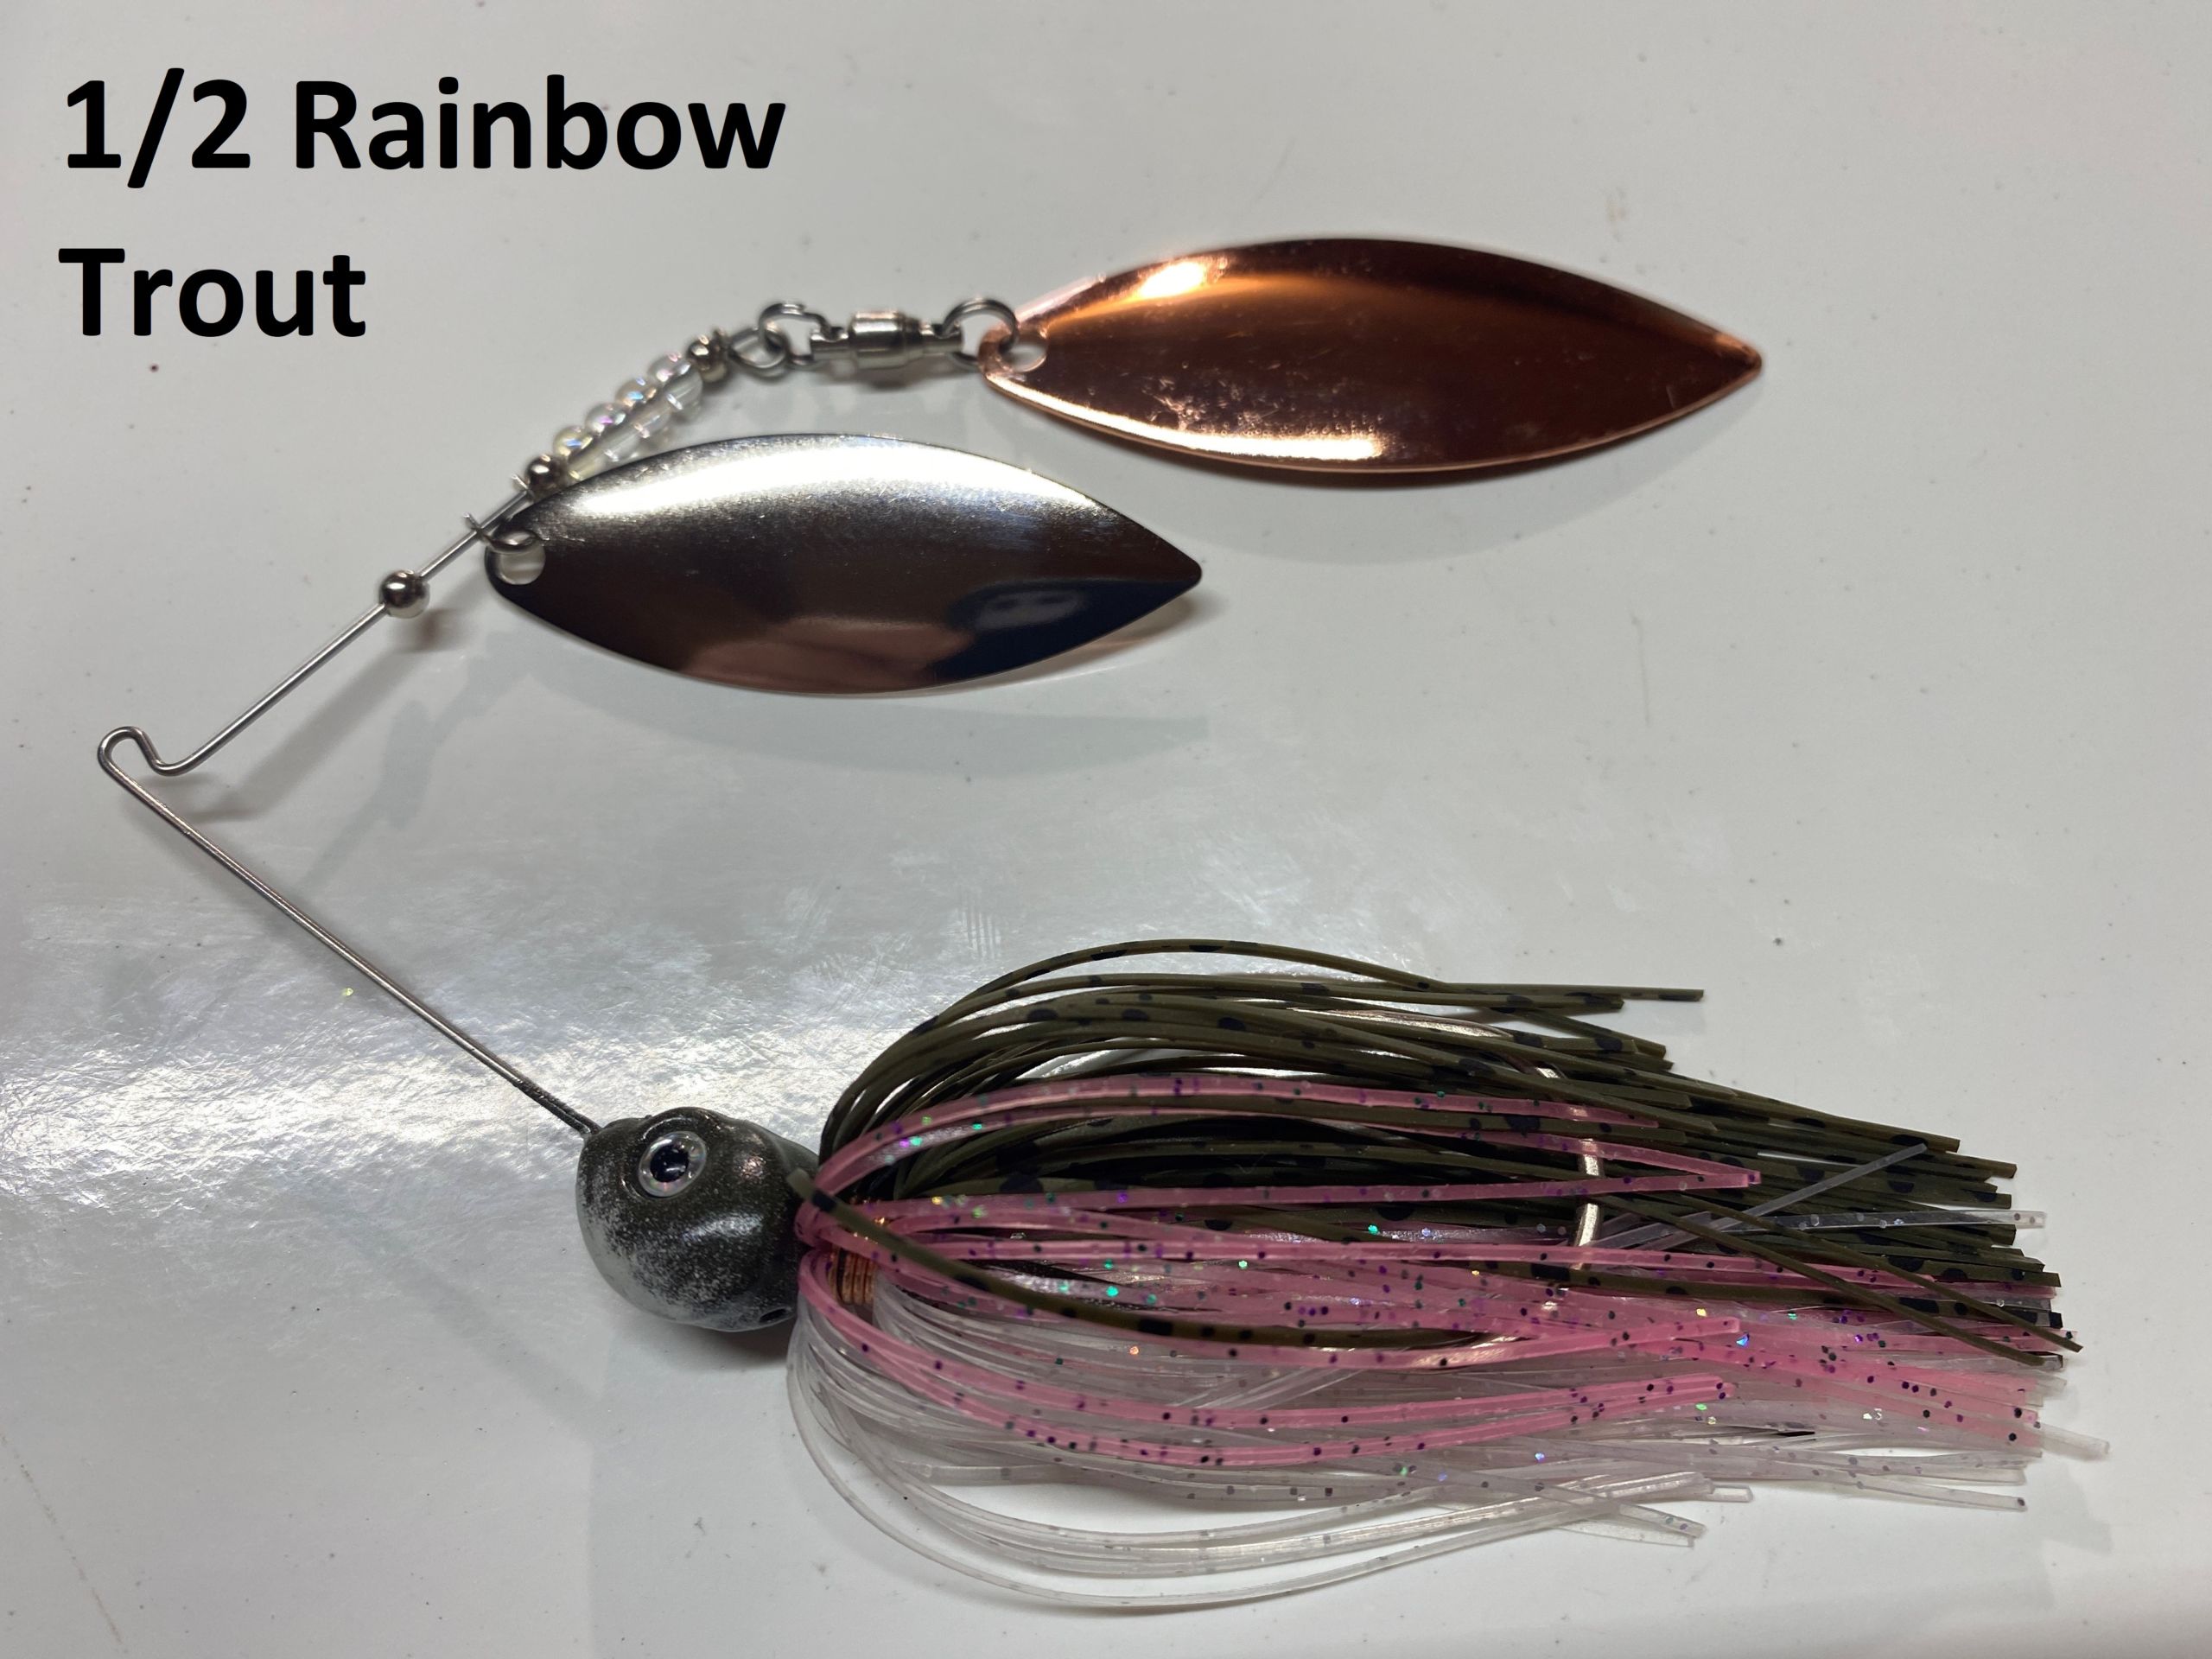 Super Duper Lure 503 Series ~ Rainbow Trout - Mr FLY